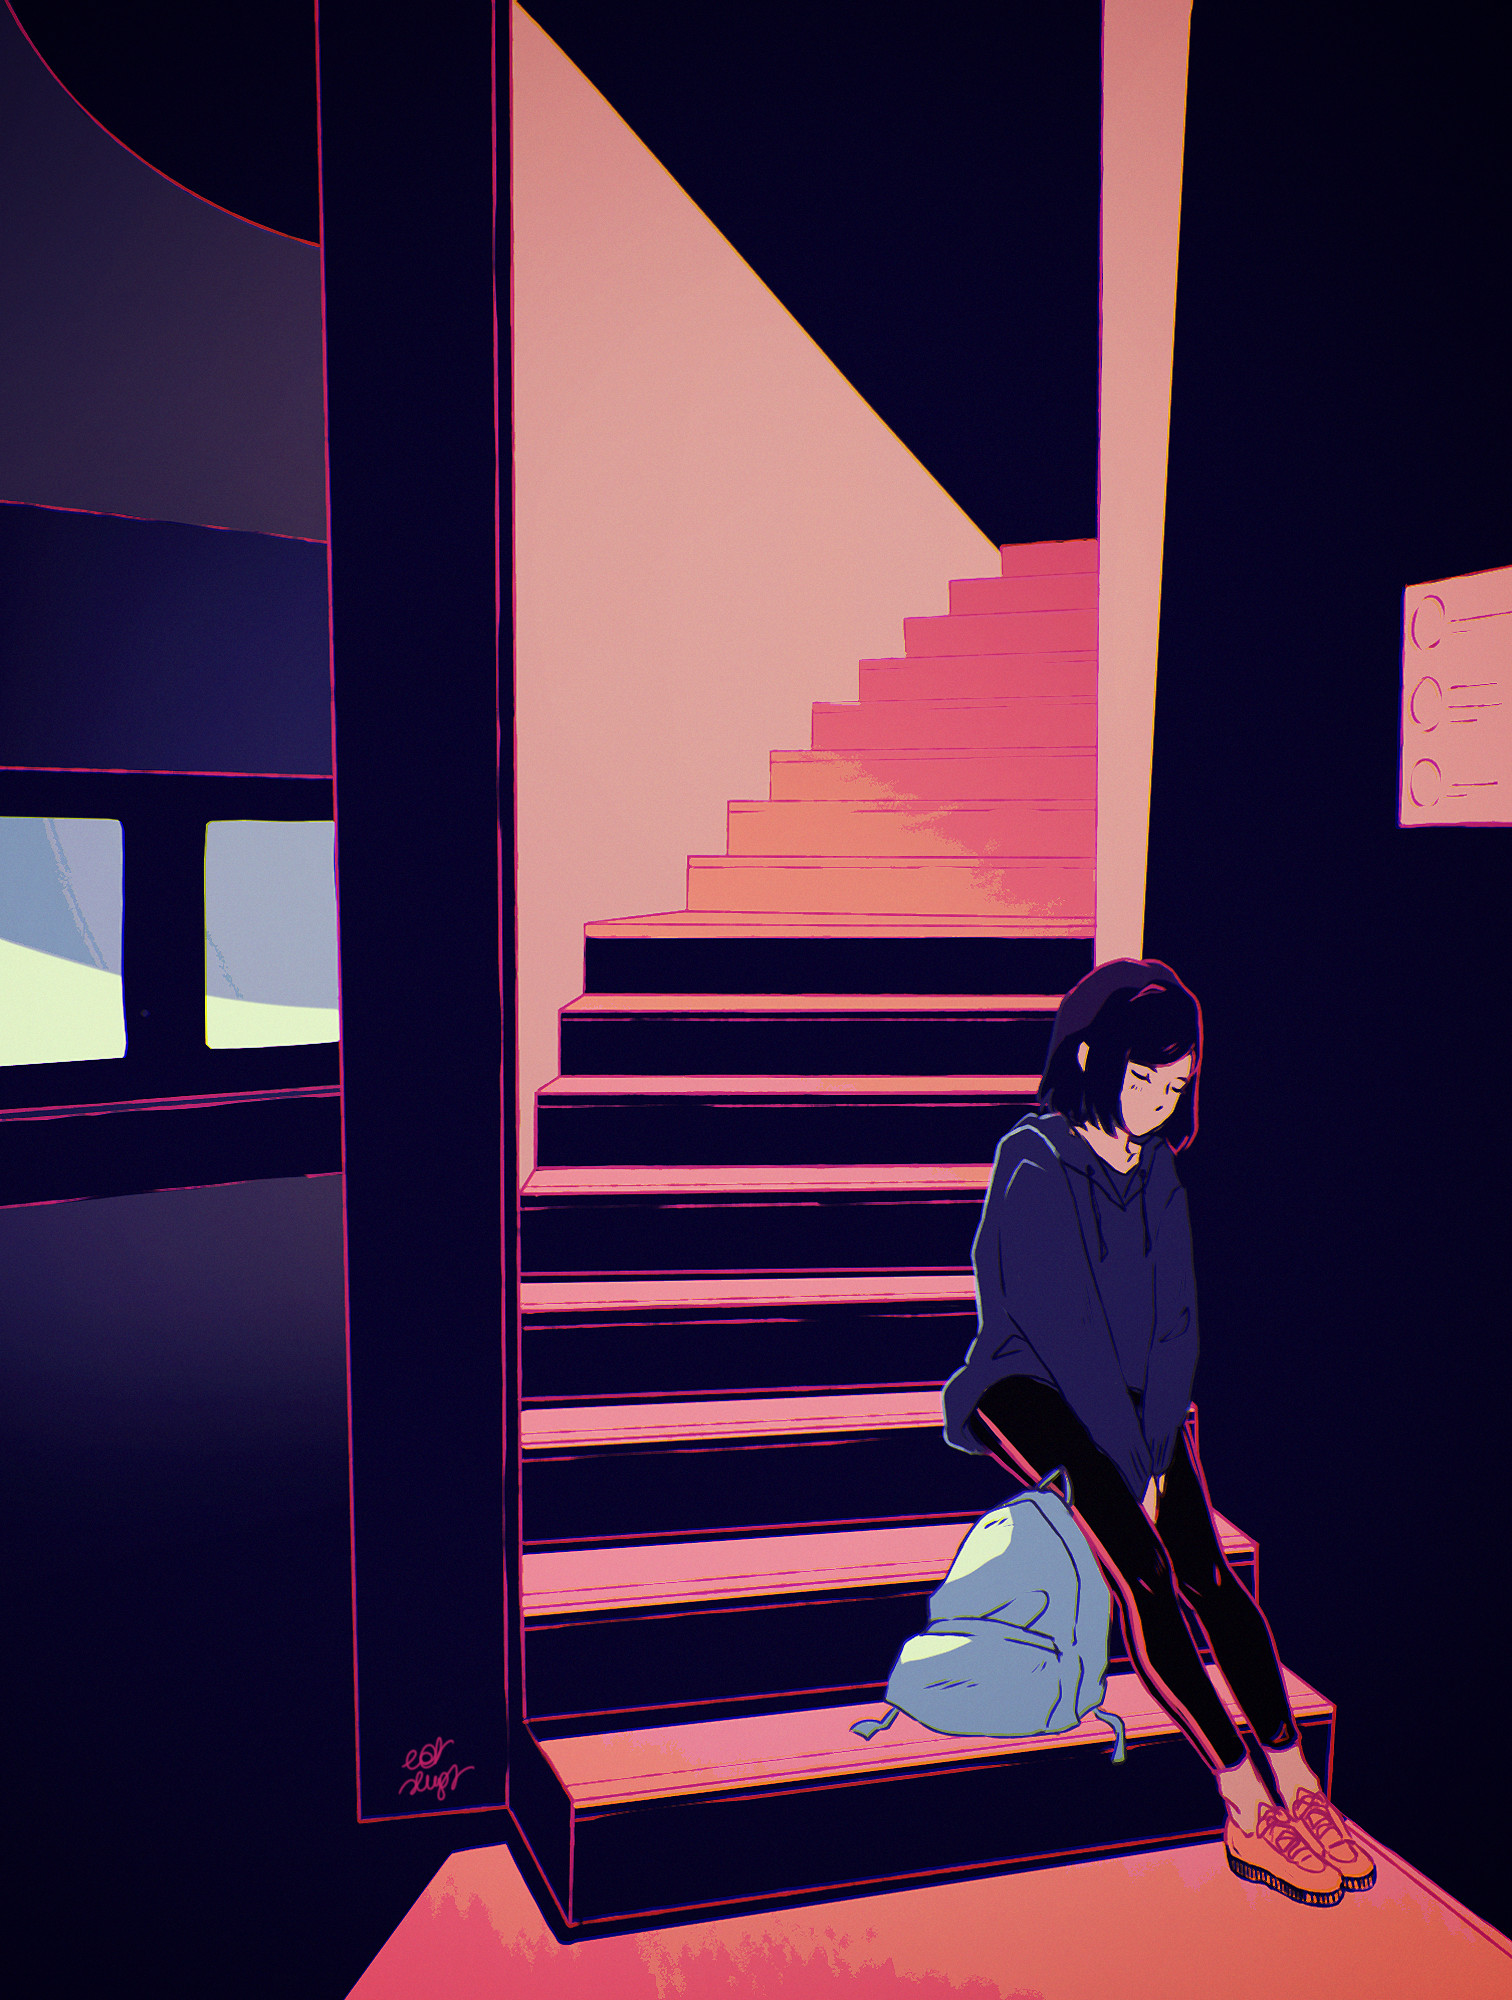 sadness, art, vector, girl, stairs, ladder, loneliness, sorrow Free Background